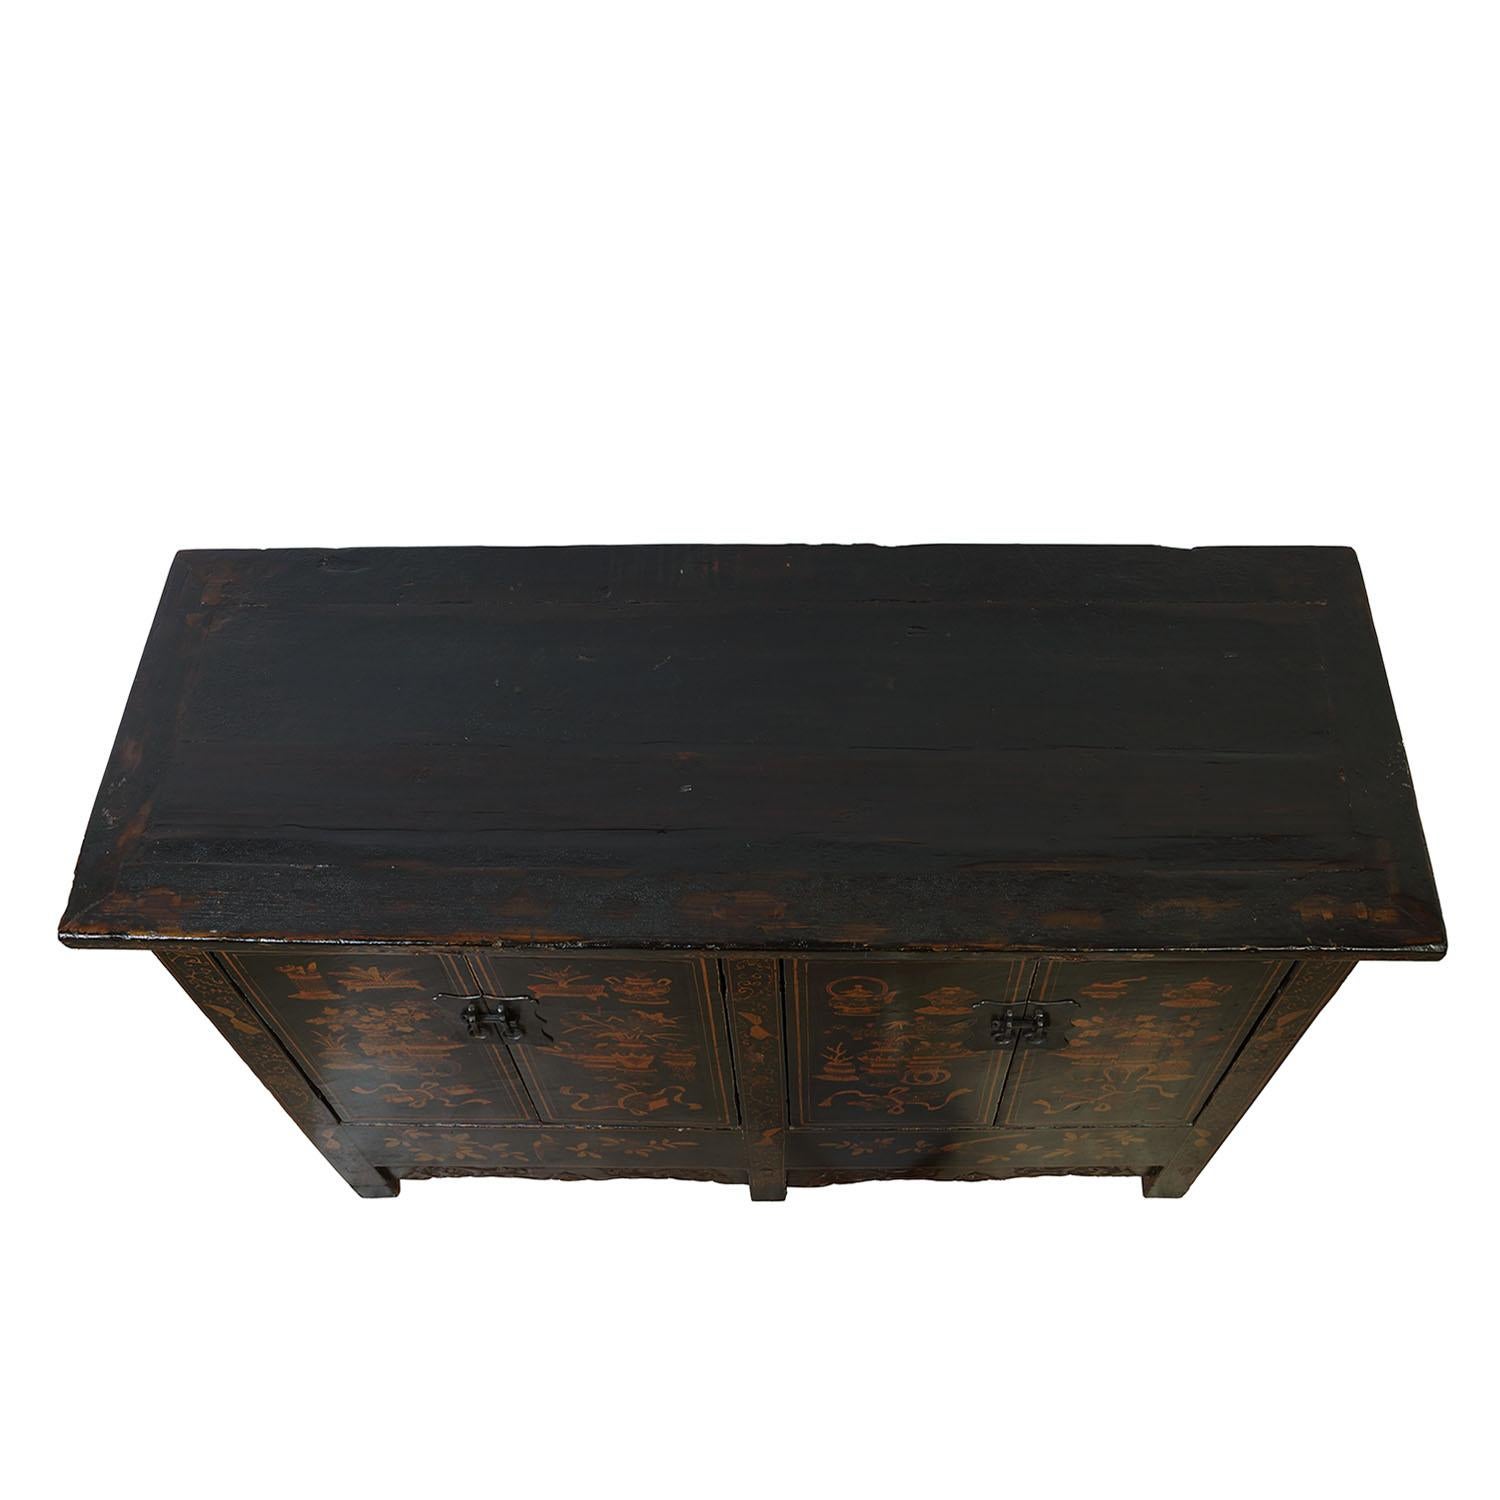 19th Century Antique Chinese Gilt Black Twin Cabinet/Buffet Table, Siderboard For Sale 3